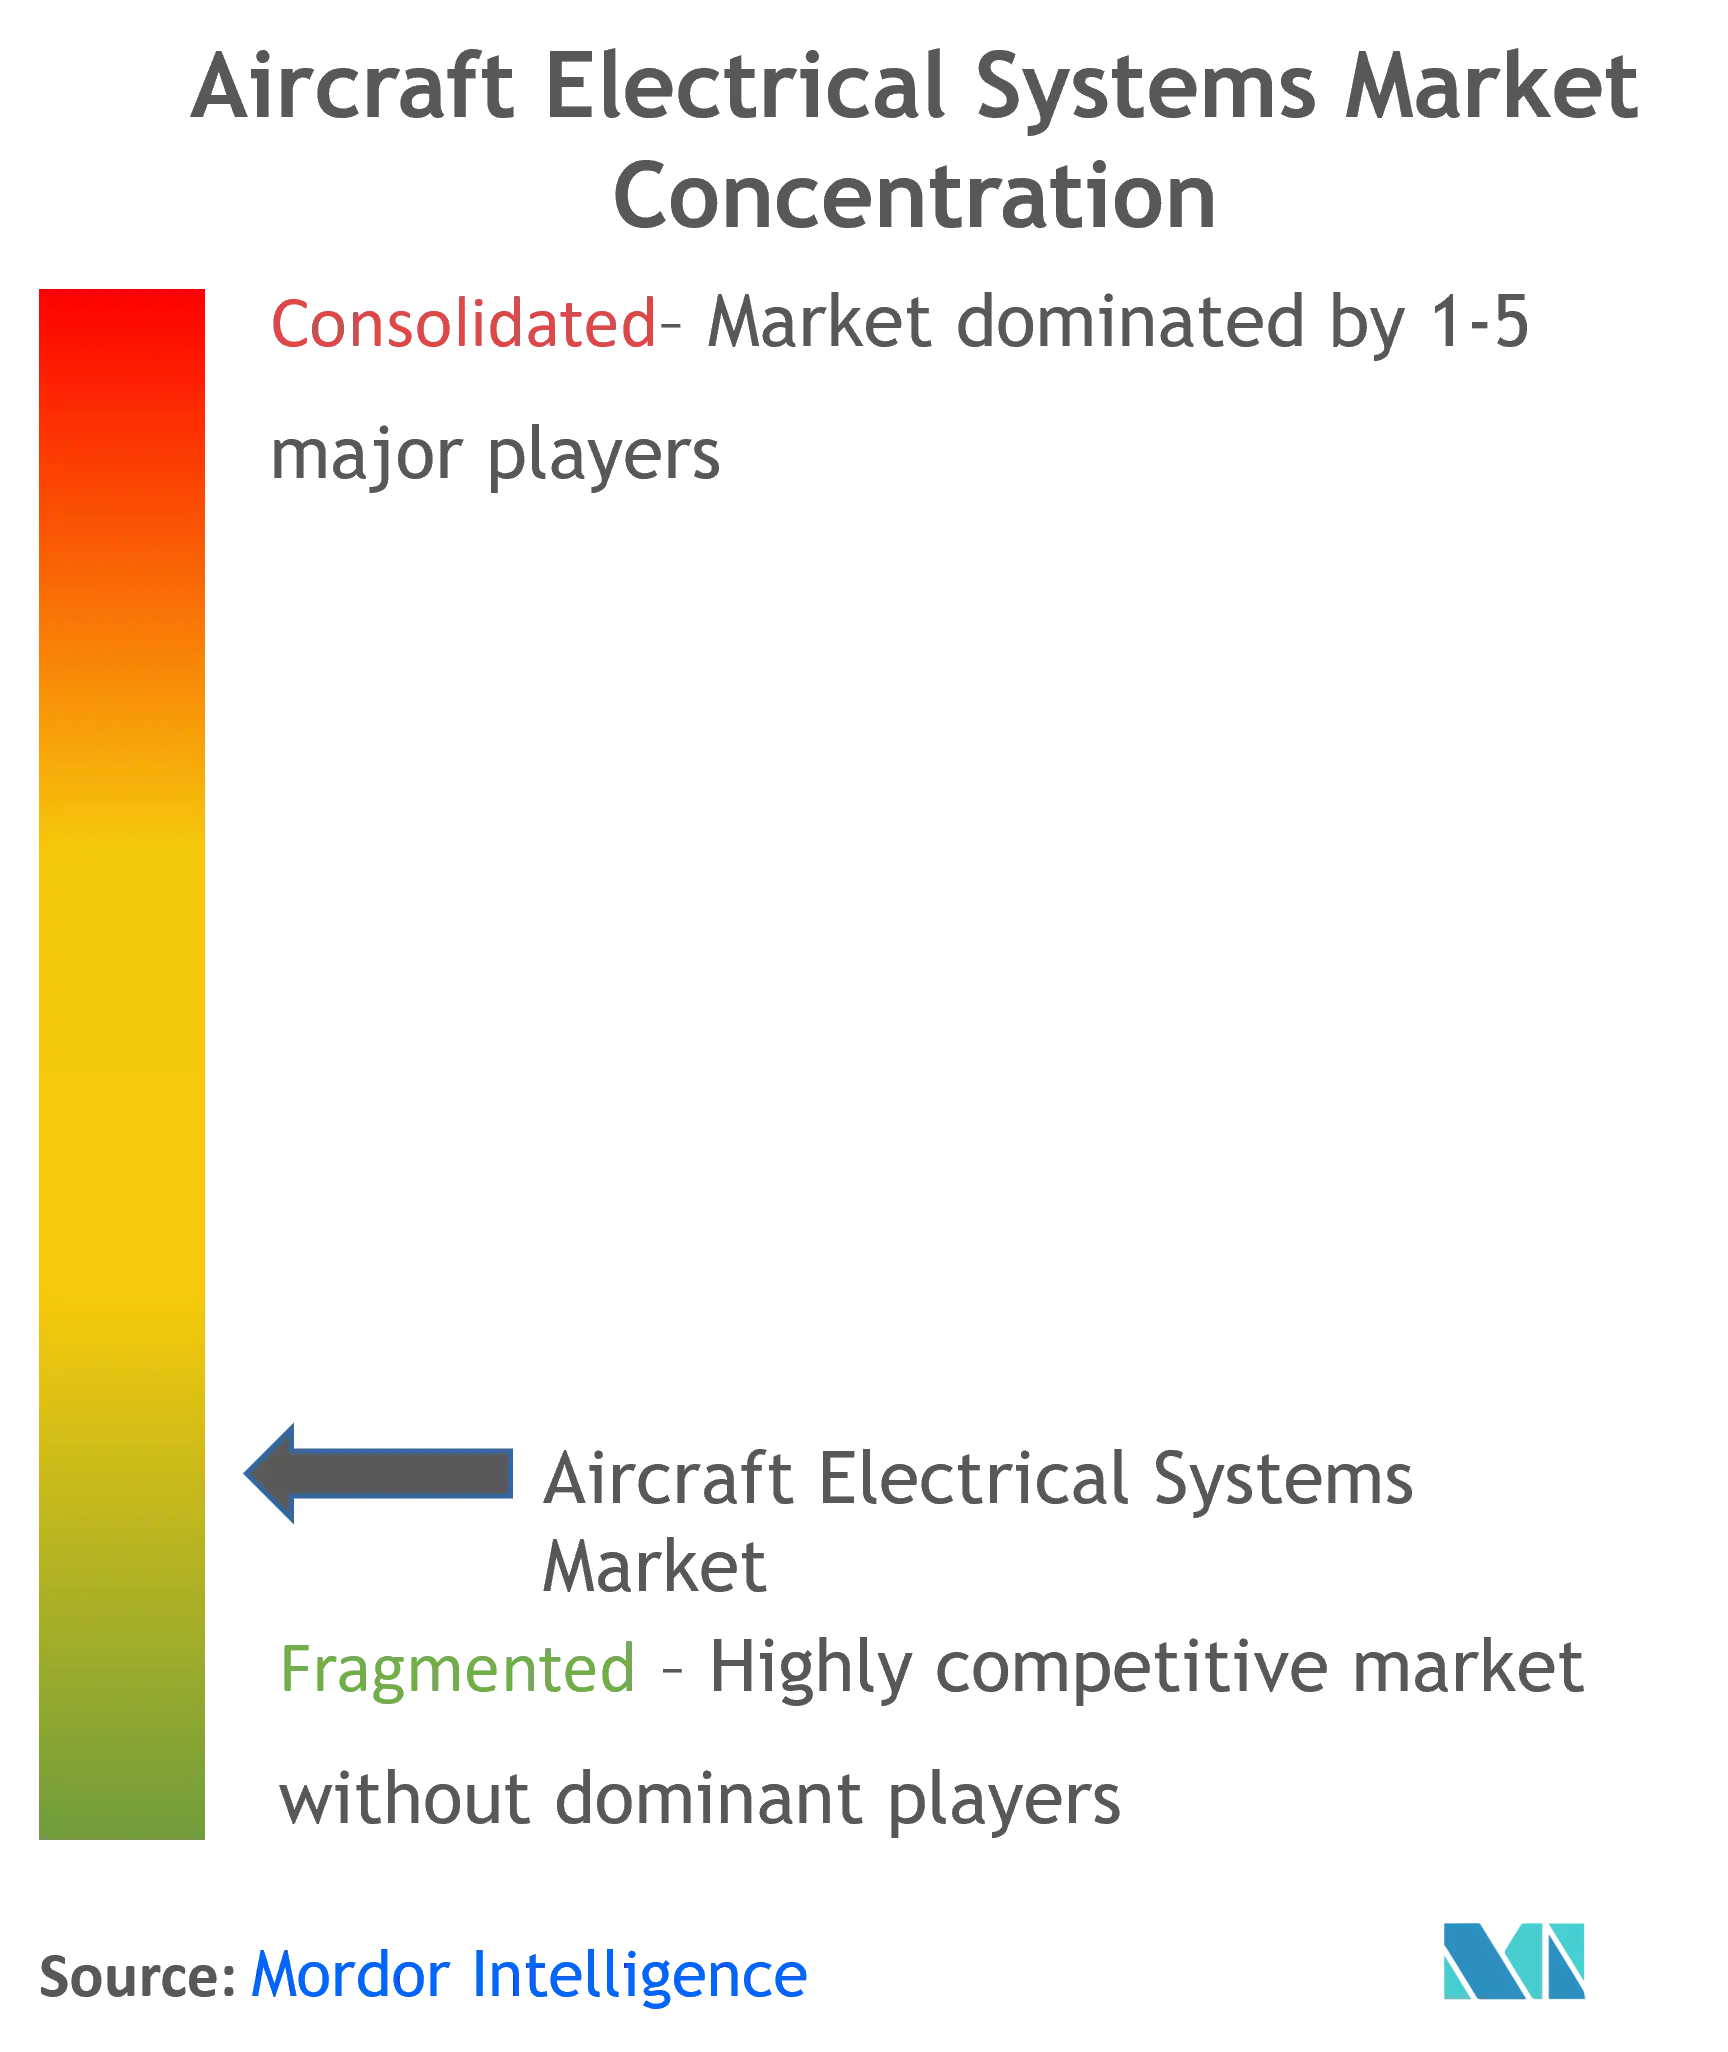 Aircraft Electrical Systems Market Concentration